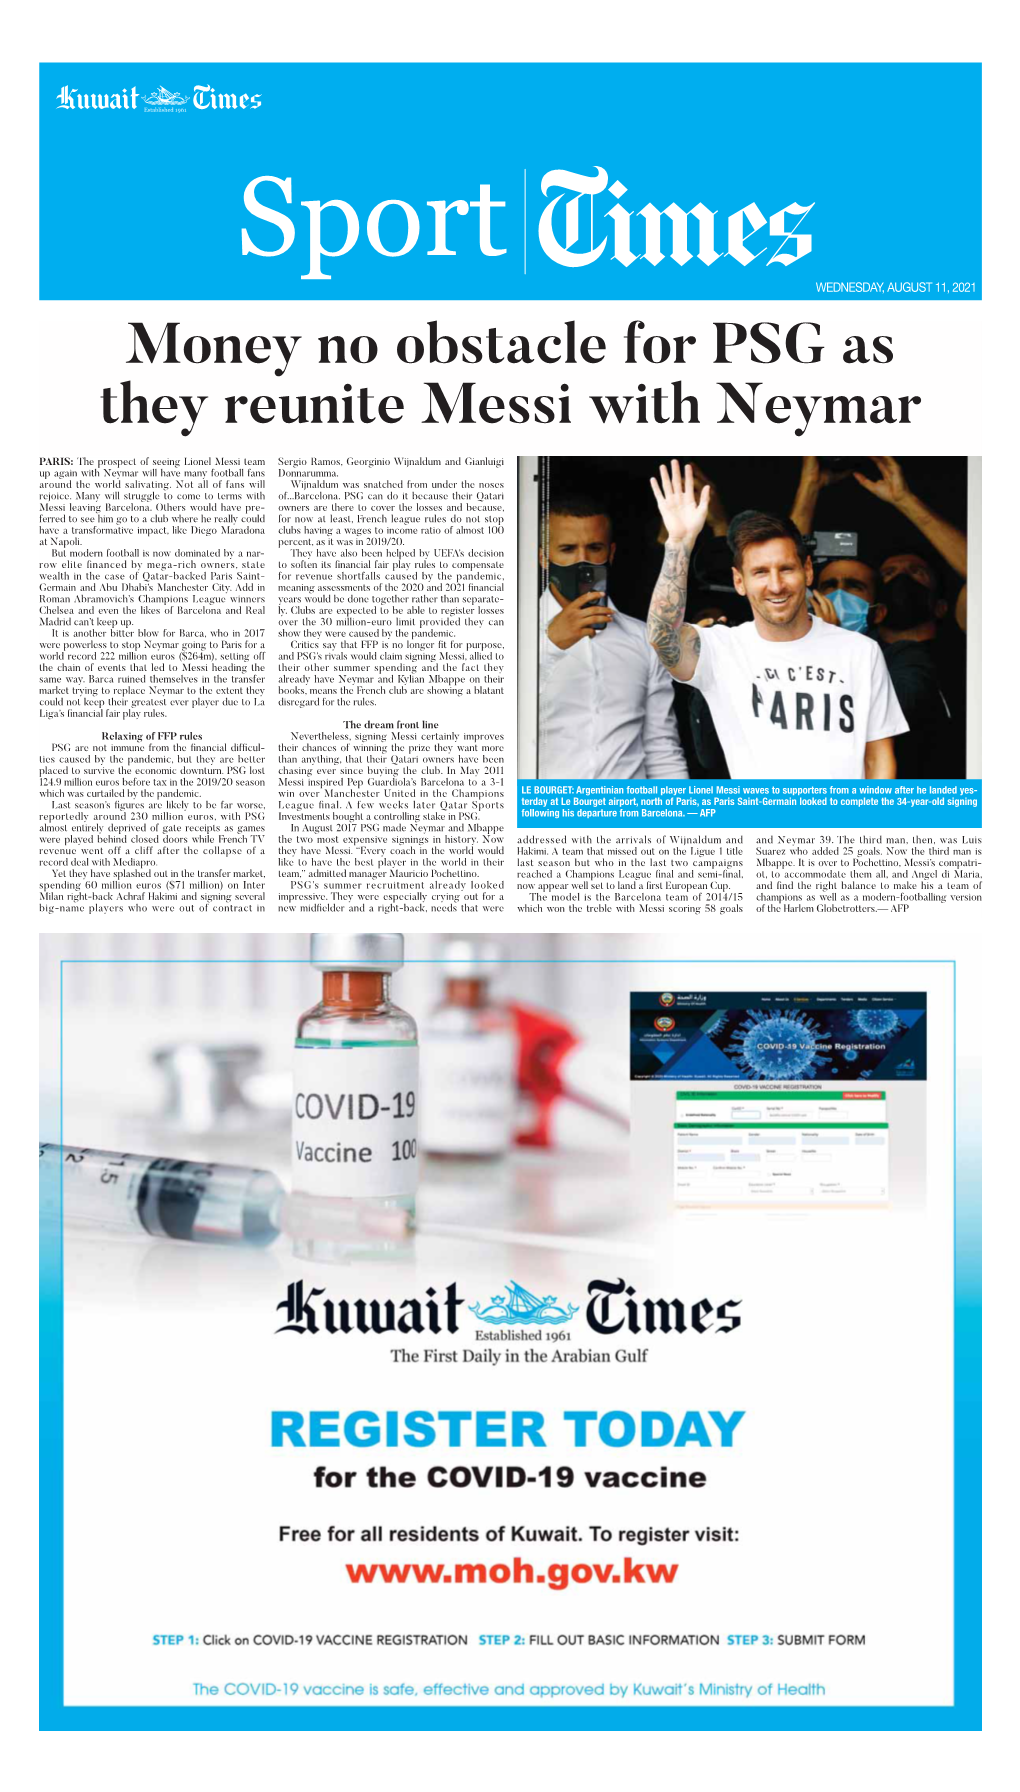 Money No Obstacle for PSG As They Reunite Messi with Neymar